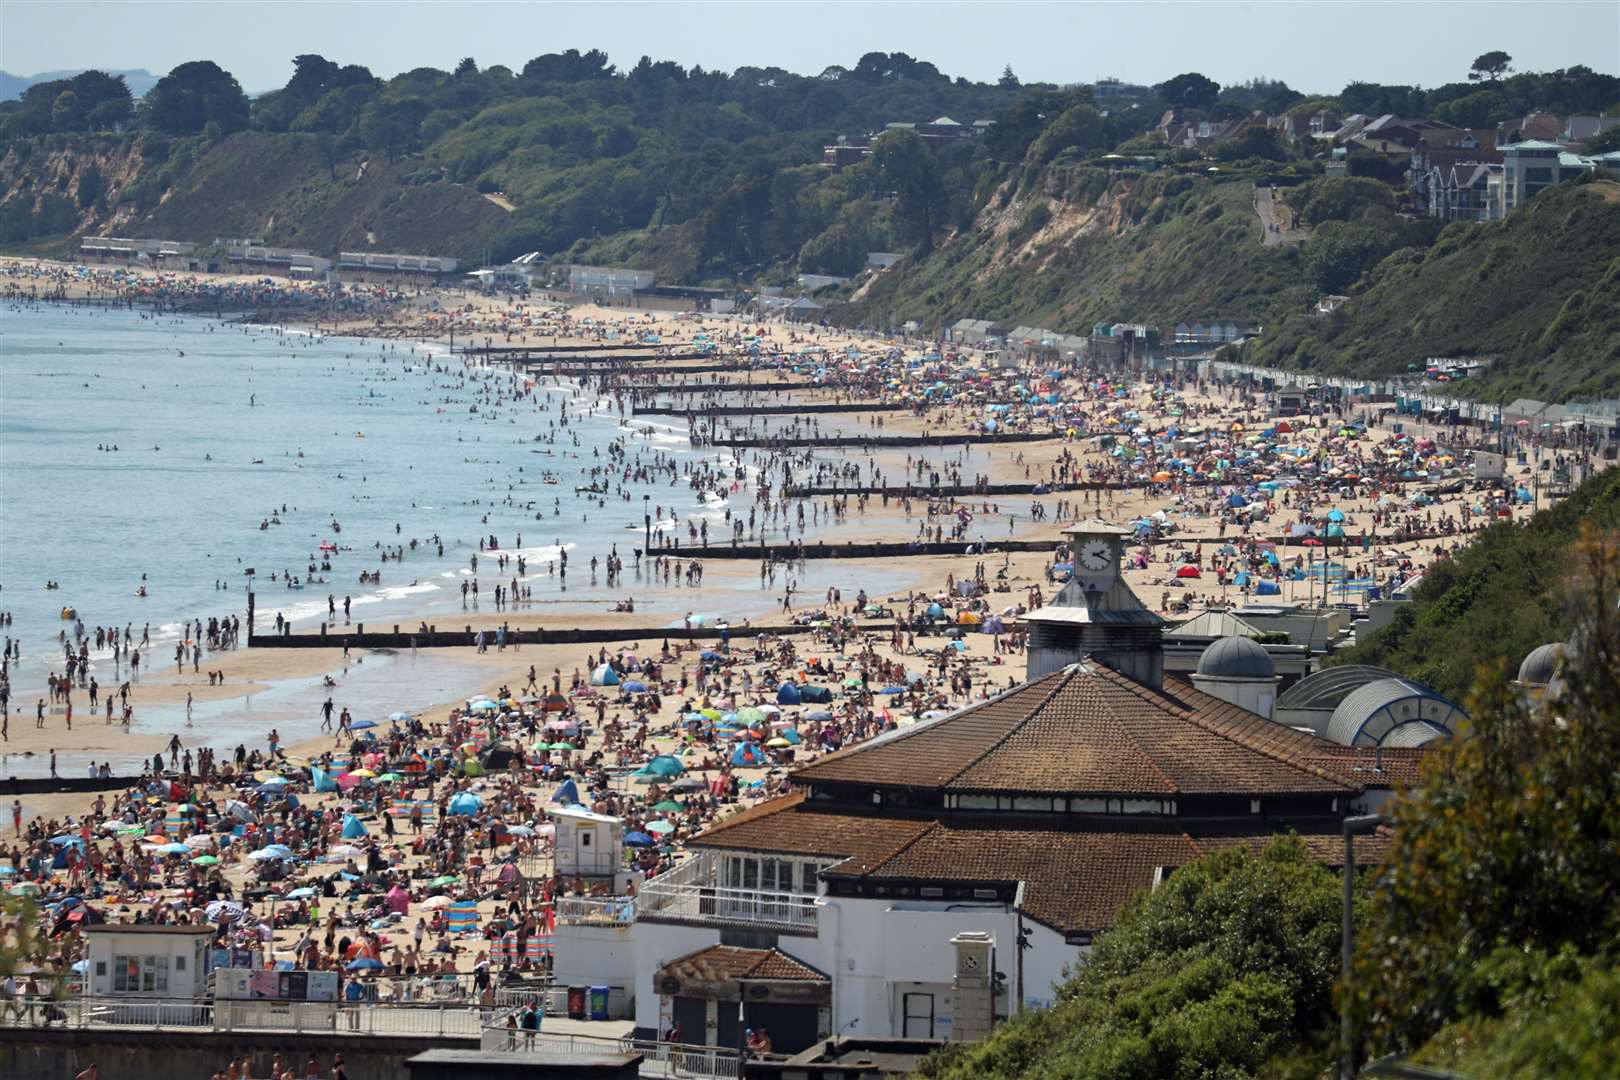 People crowd on the beach in Bournemouth, Dorset, in June despite the public being reminded to practise social distancing following the relaxation of the coronavirus lockdown restrictions in England (Andrew Matthews/PA)